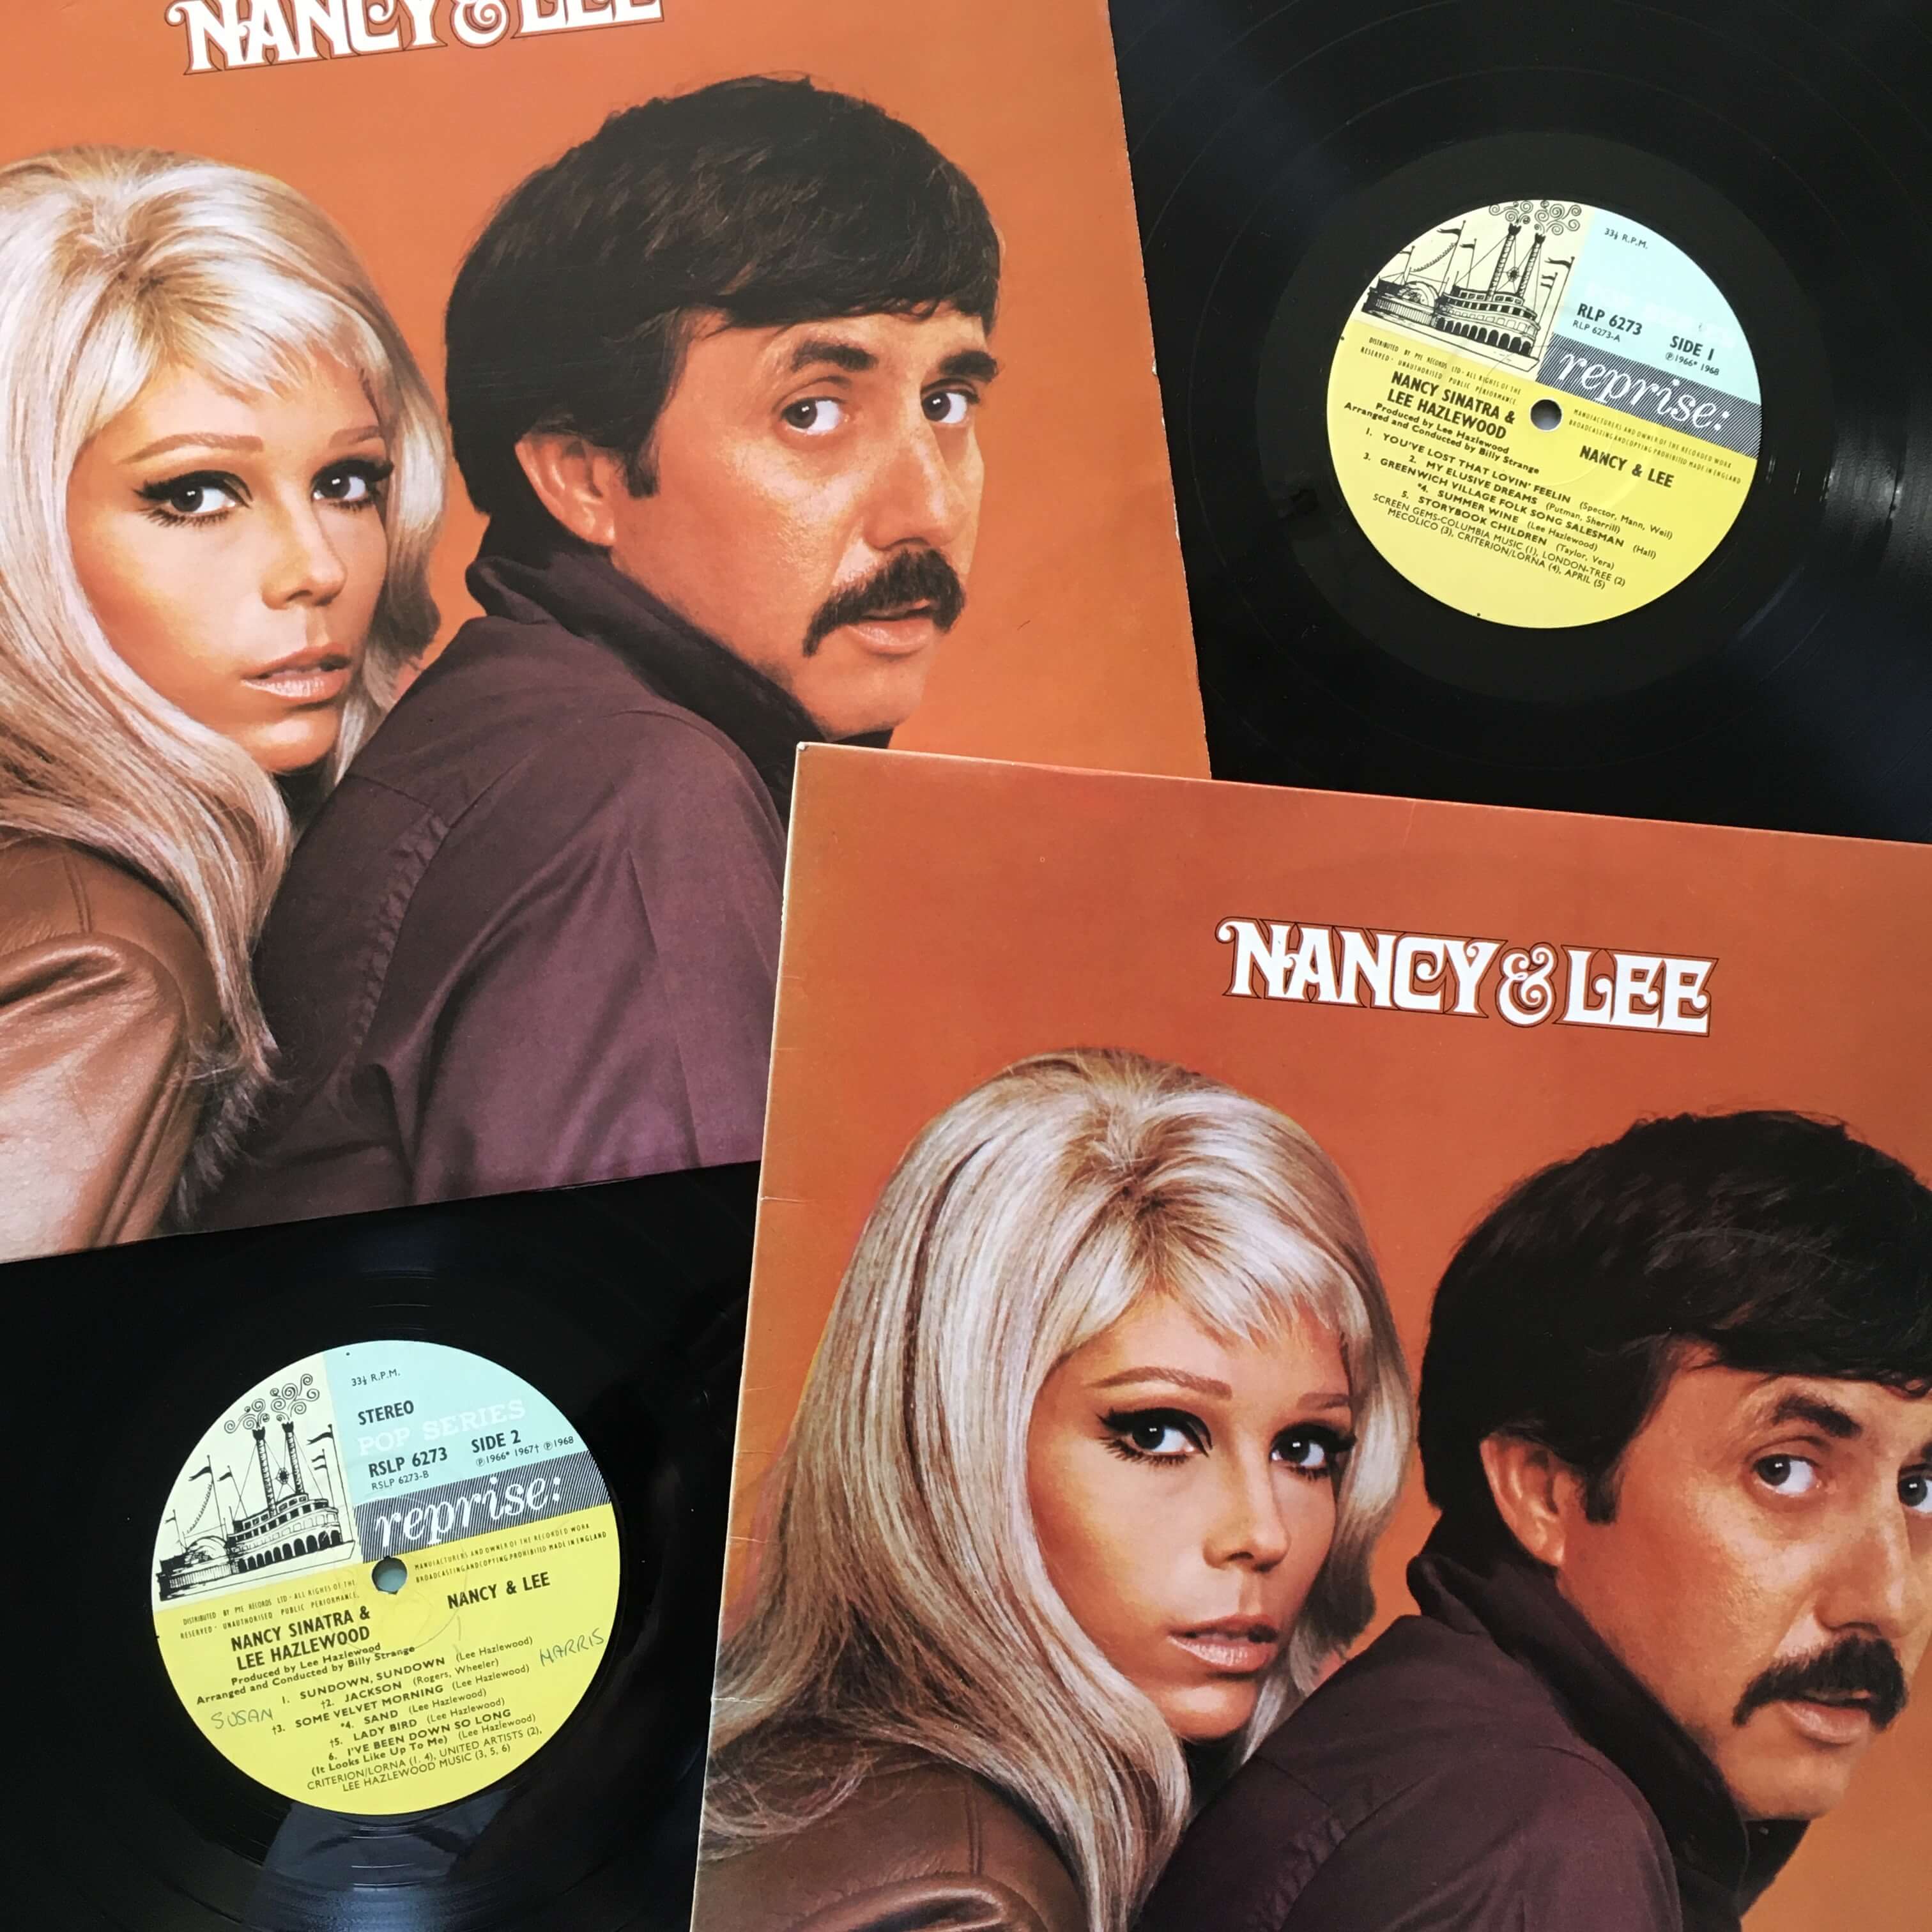 Nancy & Lee by Nancy Sinatra and Lee Hazlewood | Mixology: The Mono/Stereo  Mix Differences Podcast